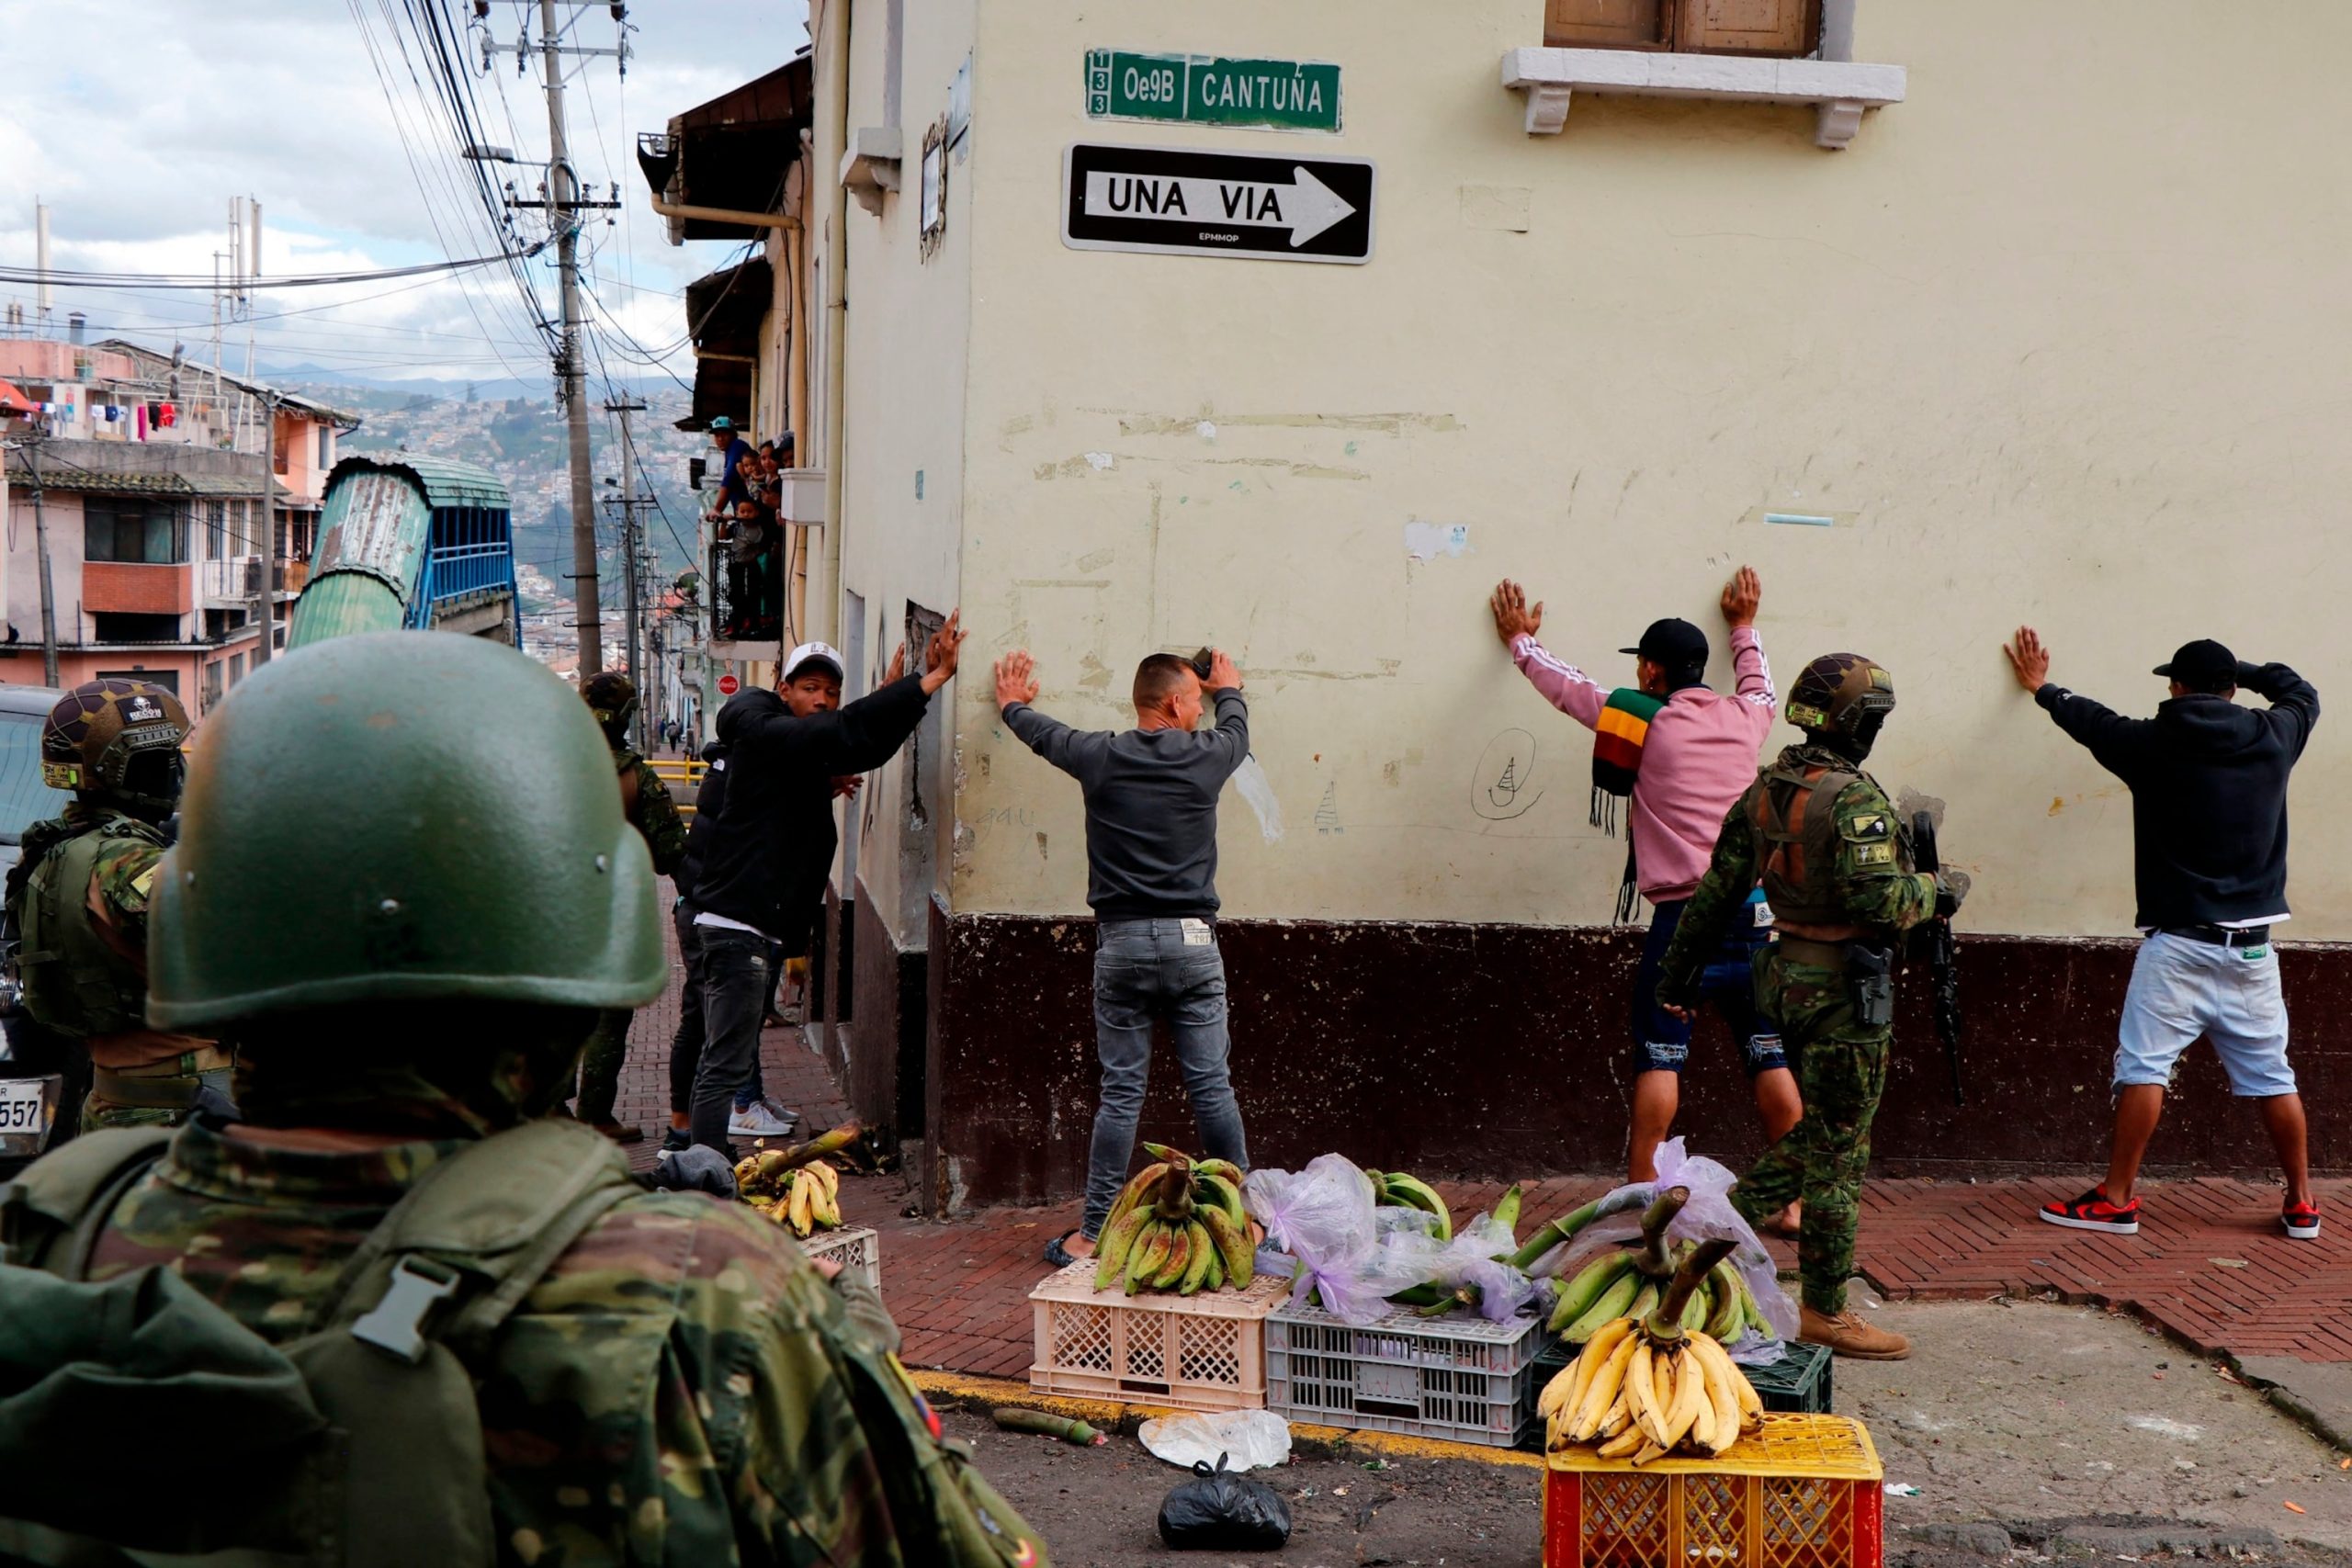 Over 100 Prison Guards Held Hostage in Ecuador During State of Emergency